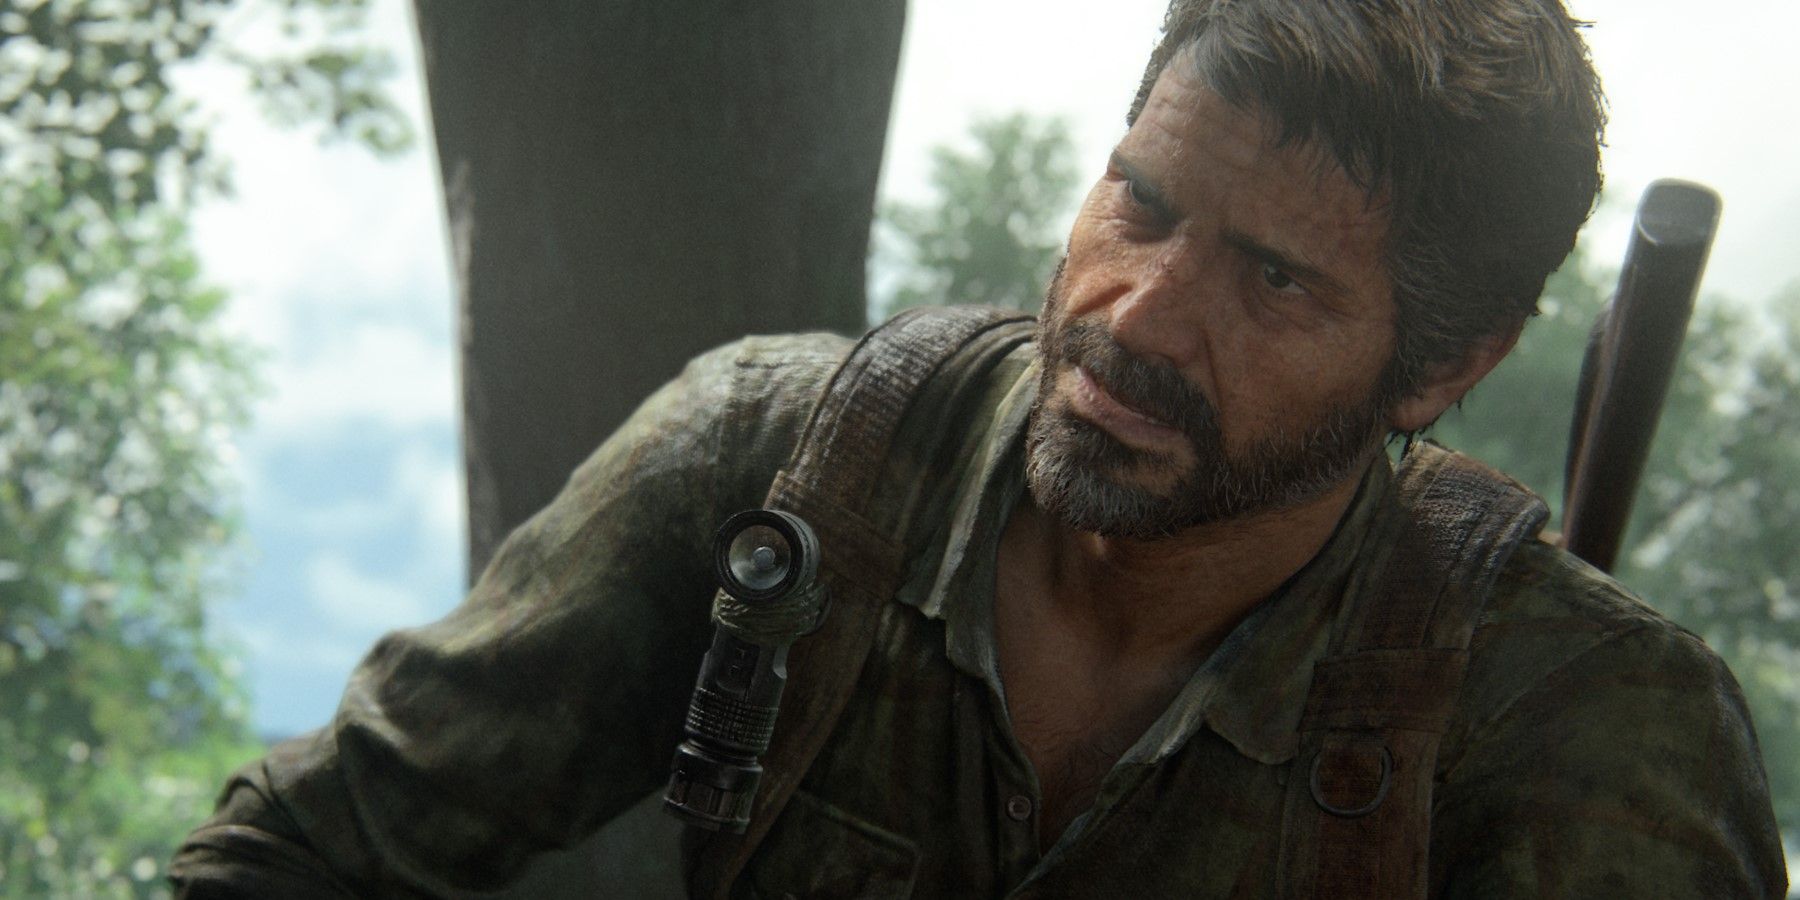 Will the The Last of Us multiplayer game come to PC?